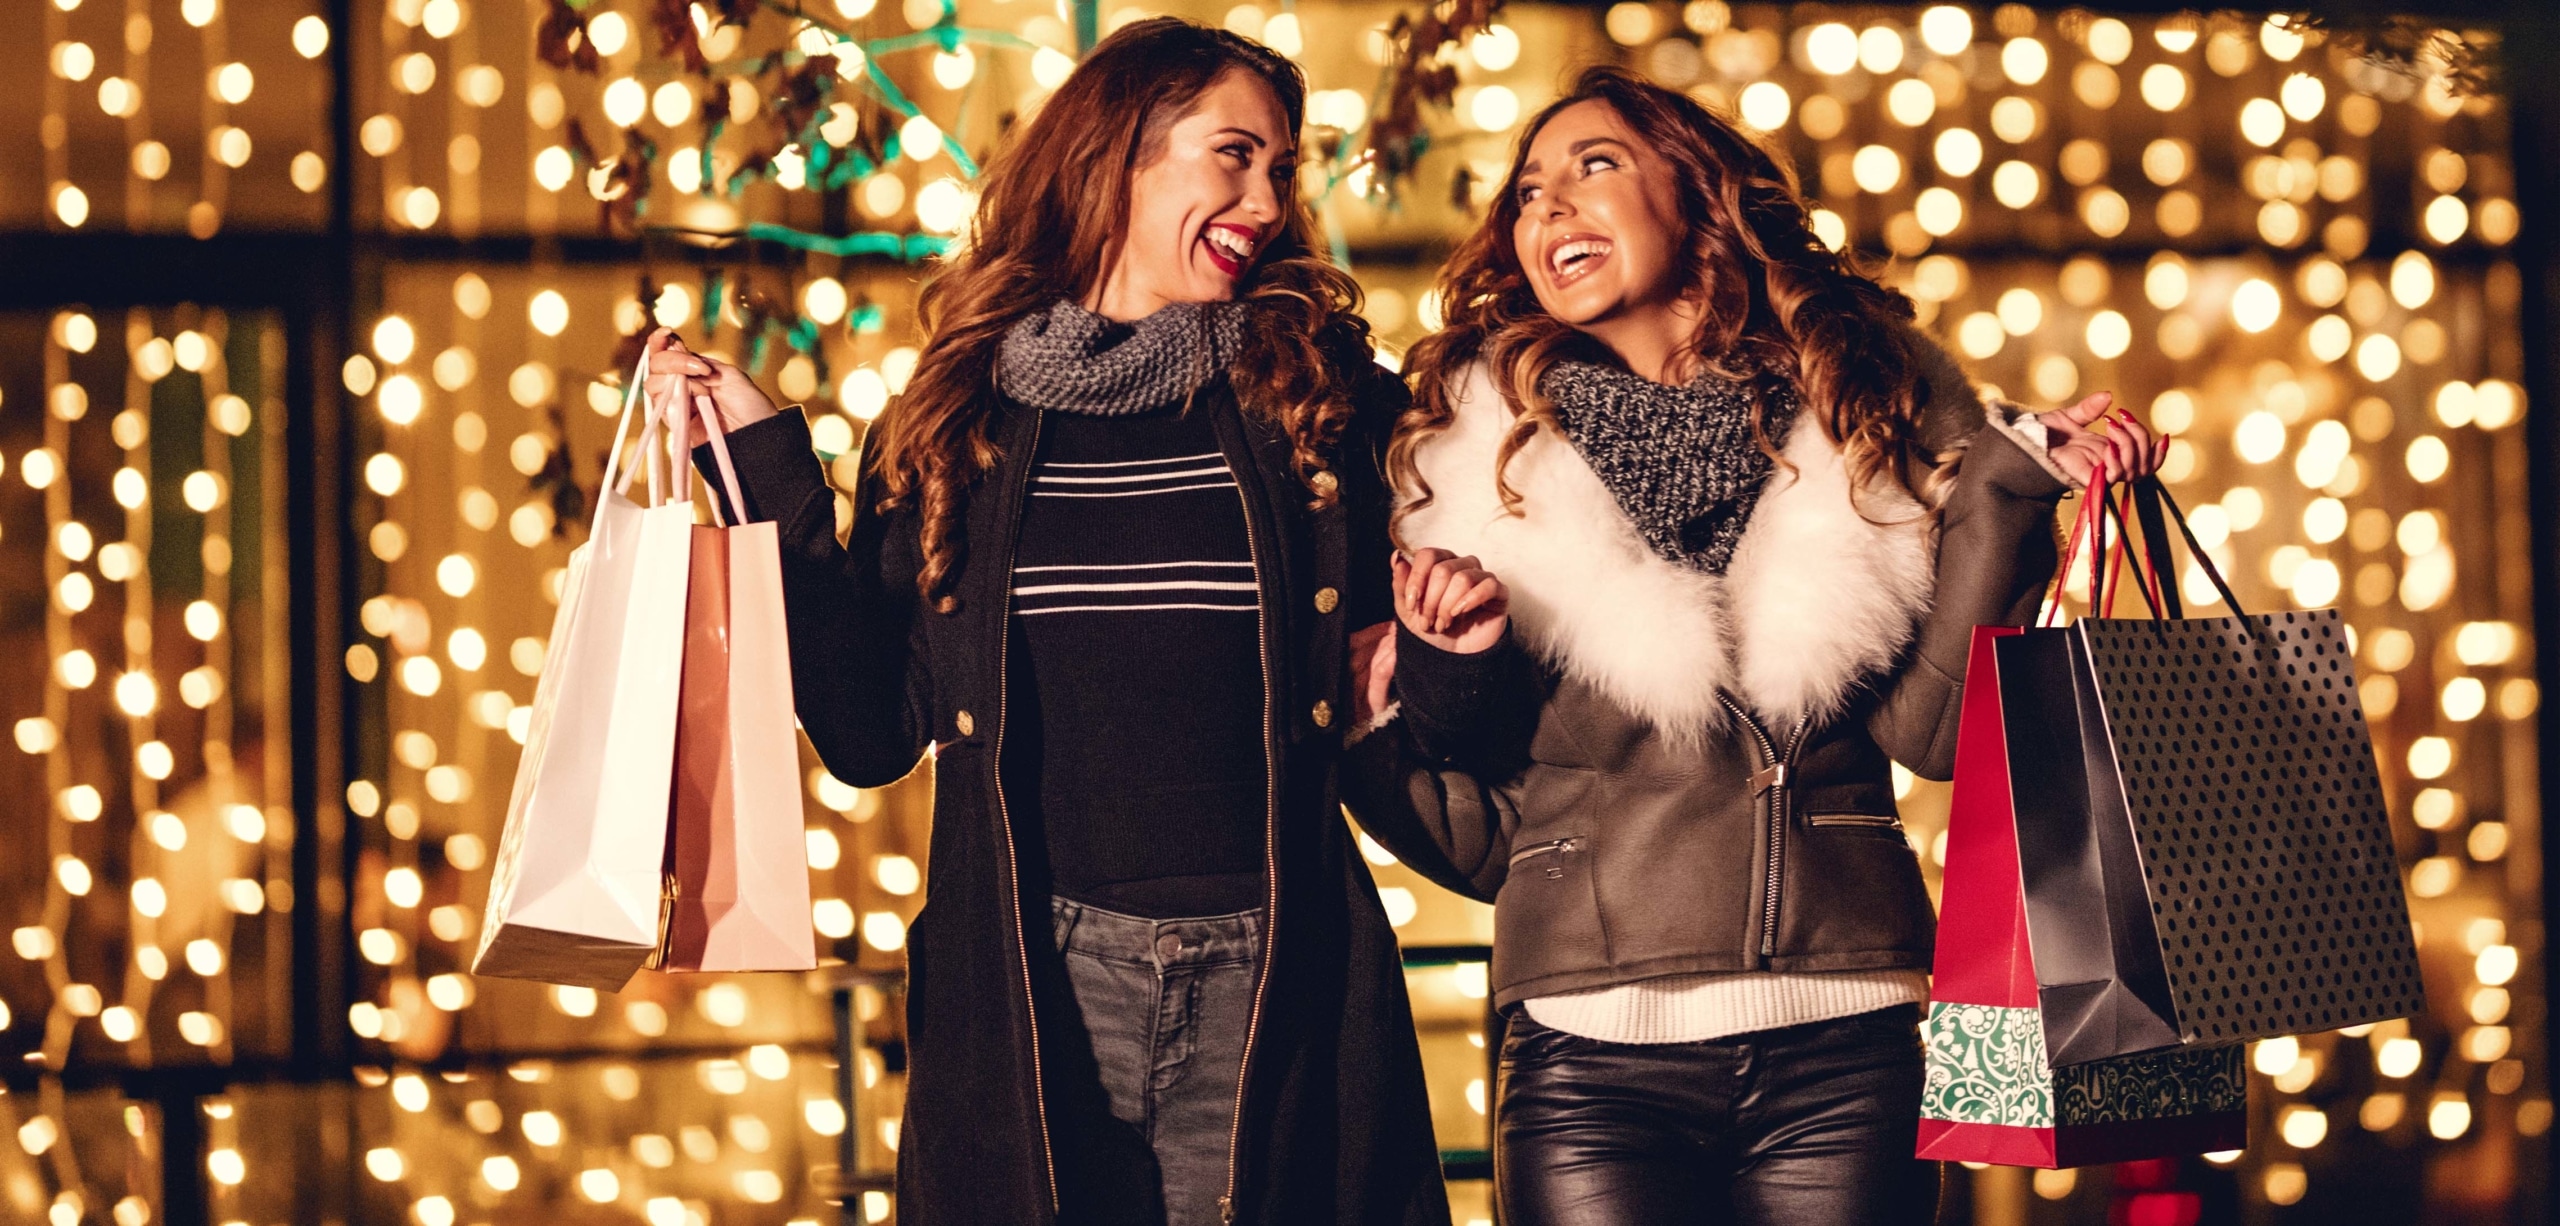 Two smiling women holding gift bags are holiday shopping | 10 Ways to Budget for the Holidays